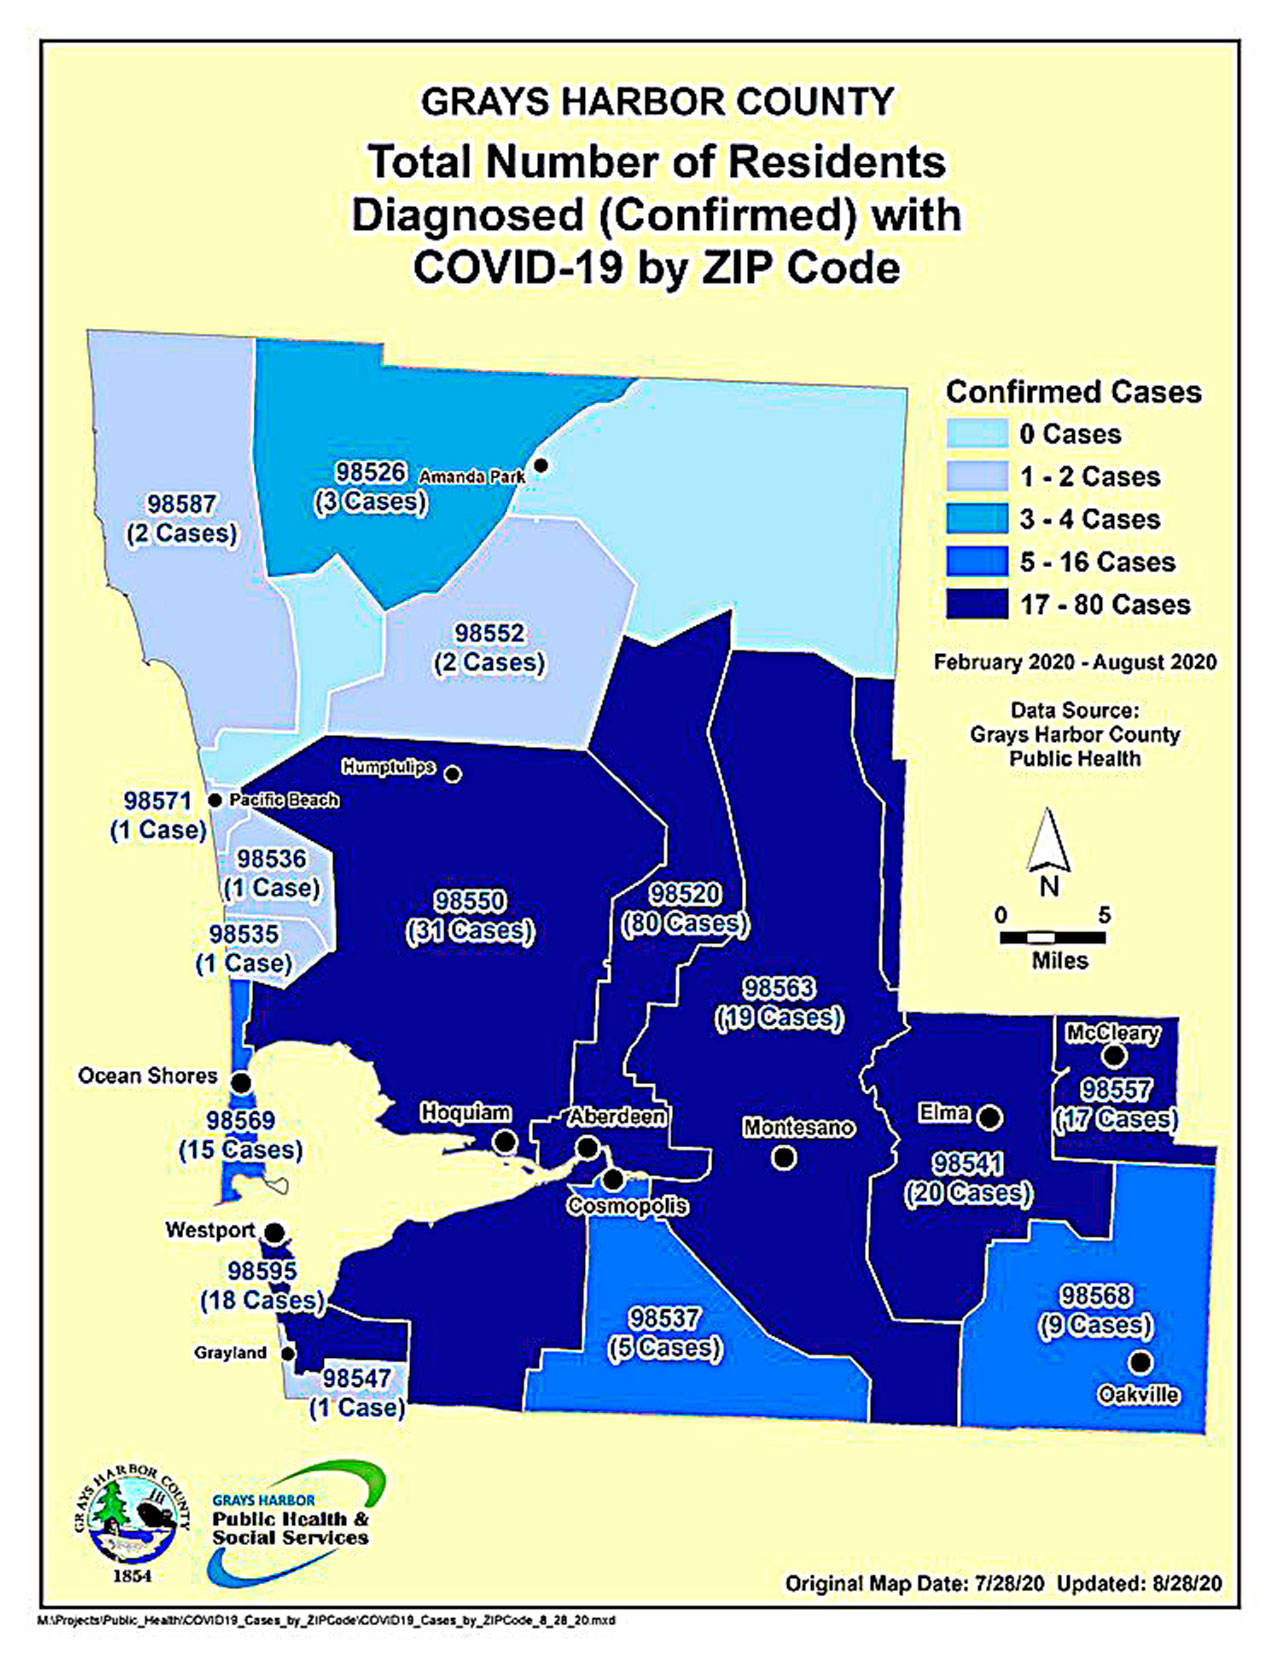 20 more COVID-19 cases reported in Grays Harbor County since Friday